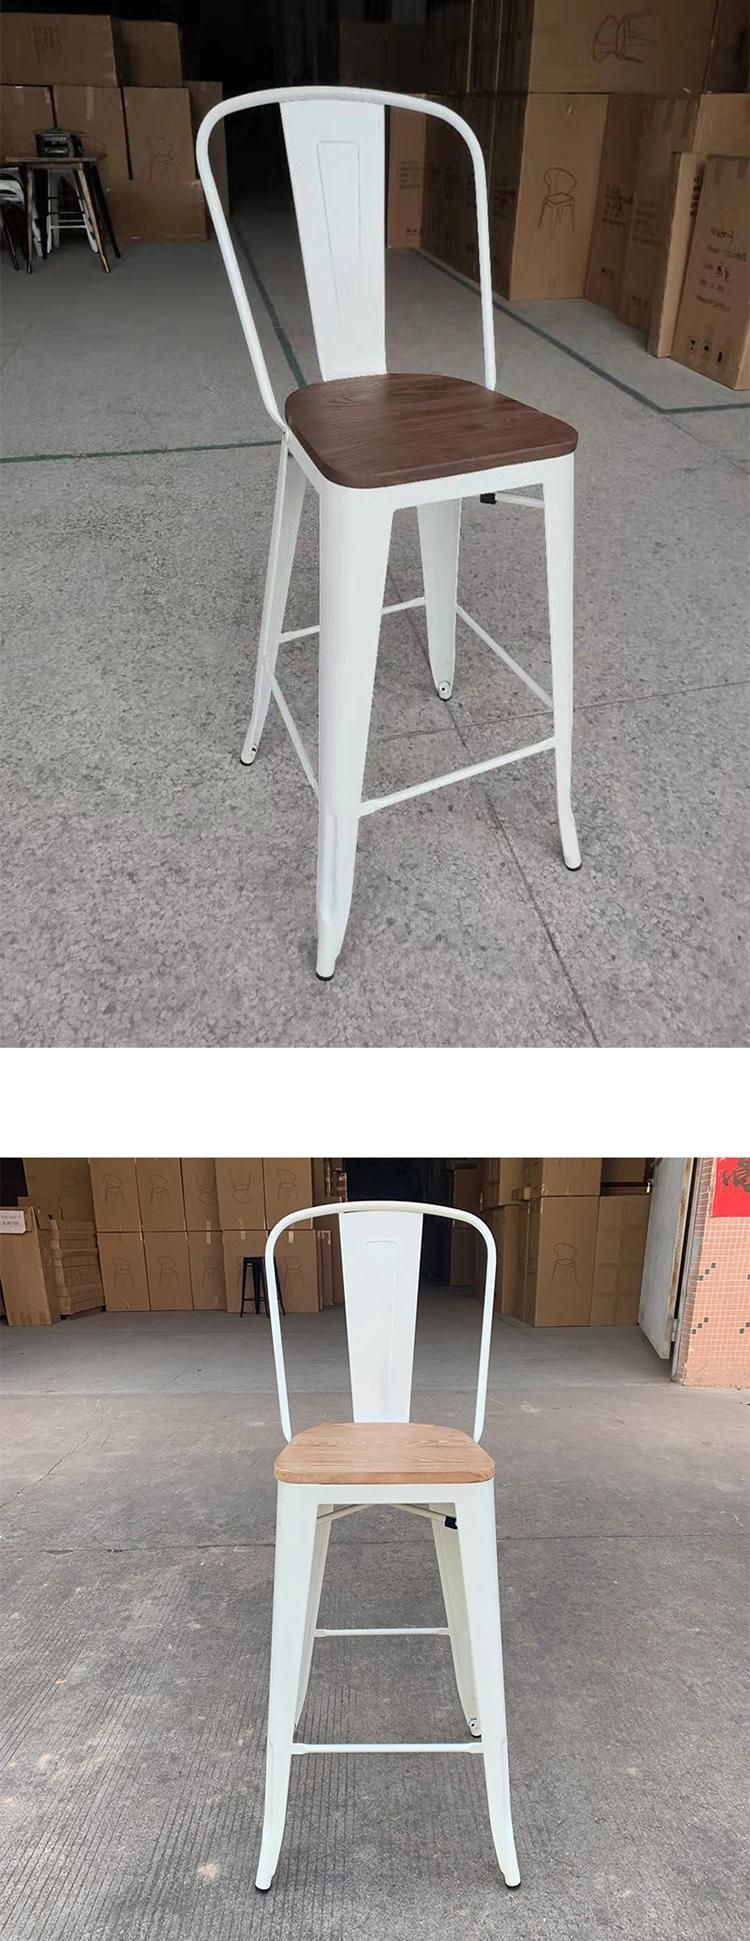 Hot Sale Nordic Design Restaurant Coffee Stool High Quality Plating Iron Frame Wooden Cushion Bar Chair with Big Backrest